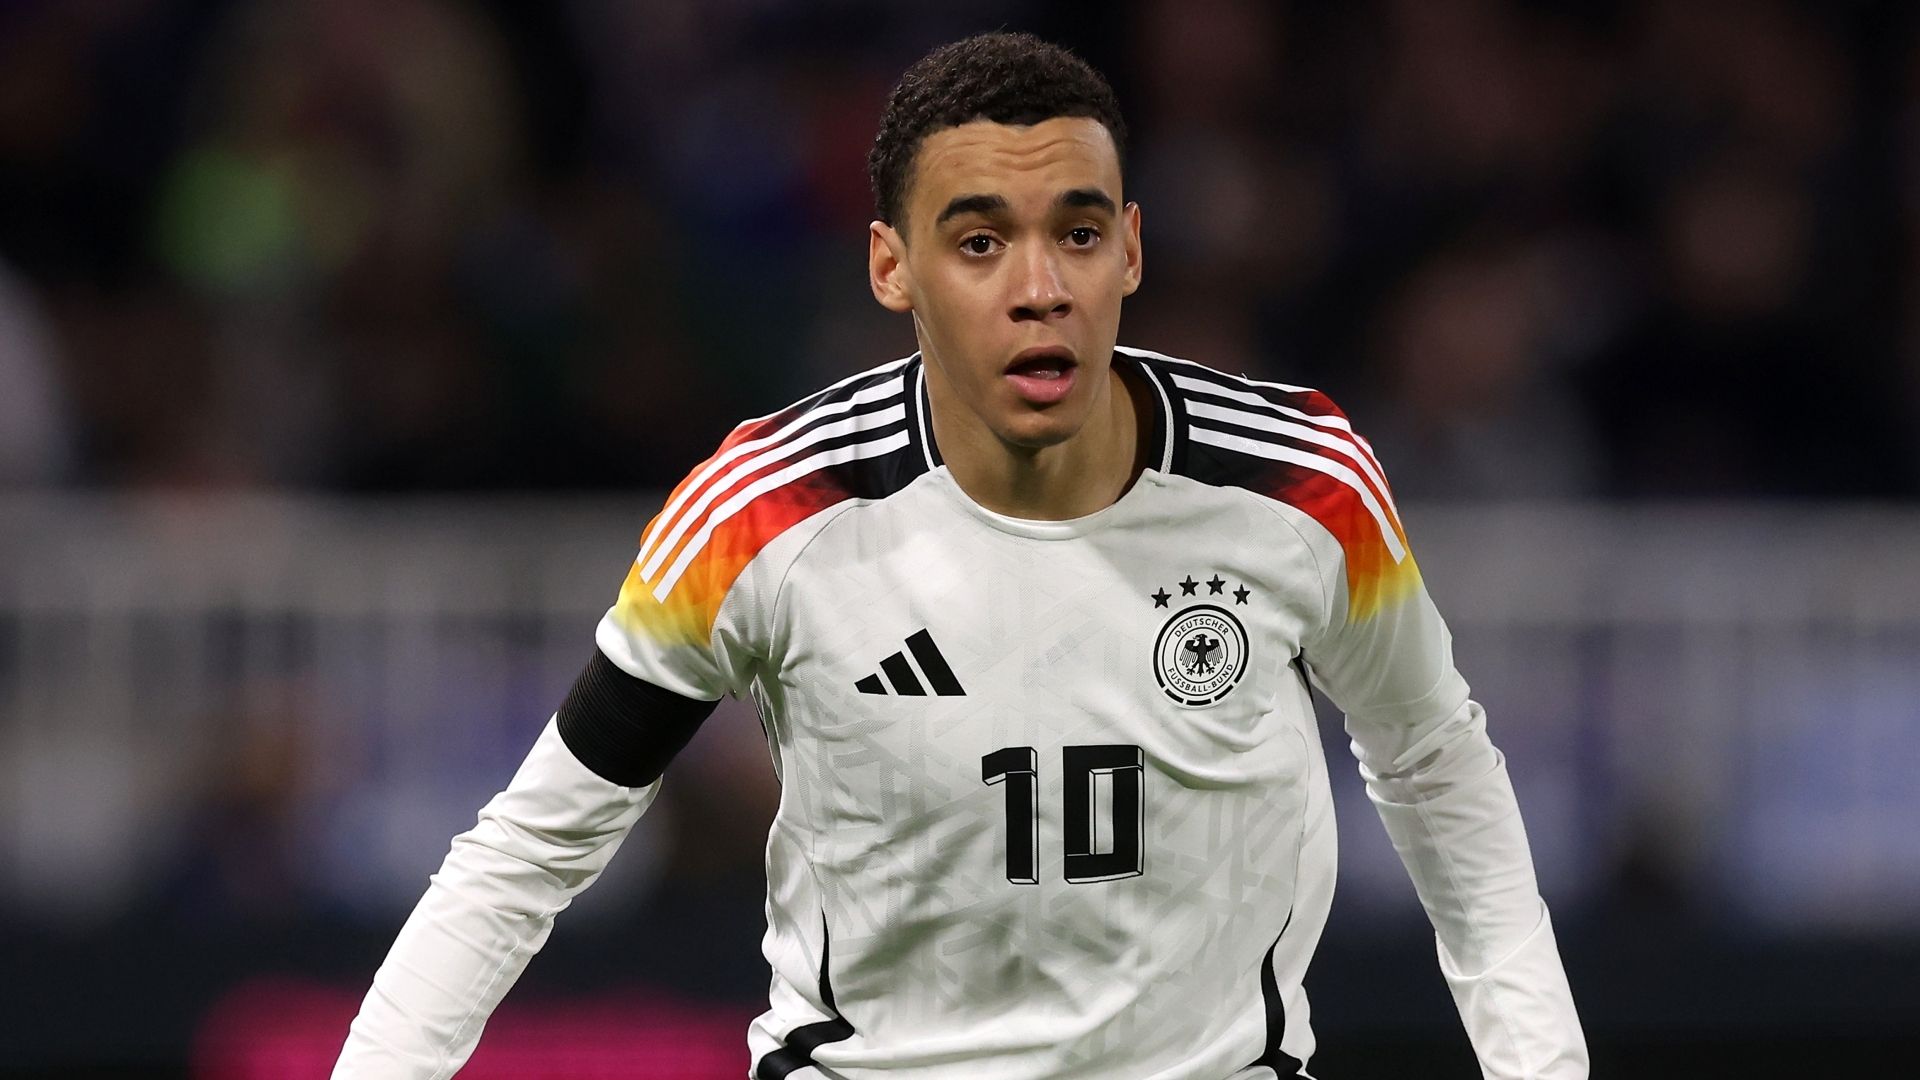 Germany vs Netherlands: Live stream, TV channel, kick-off time & where to watch | Goal.com UK